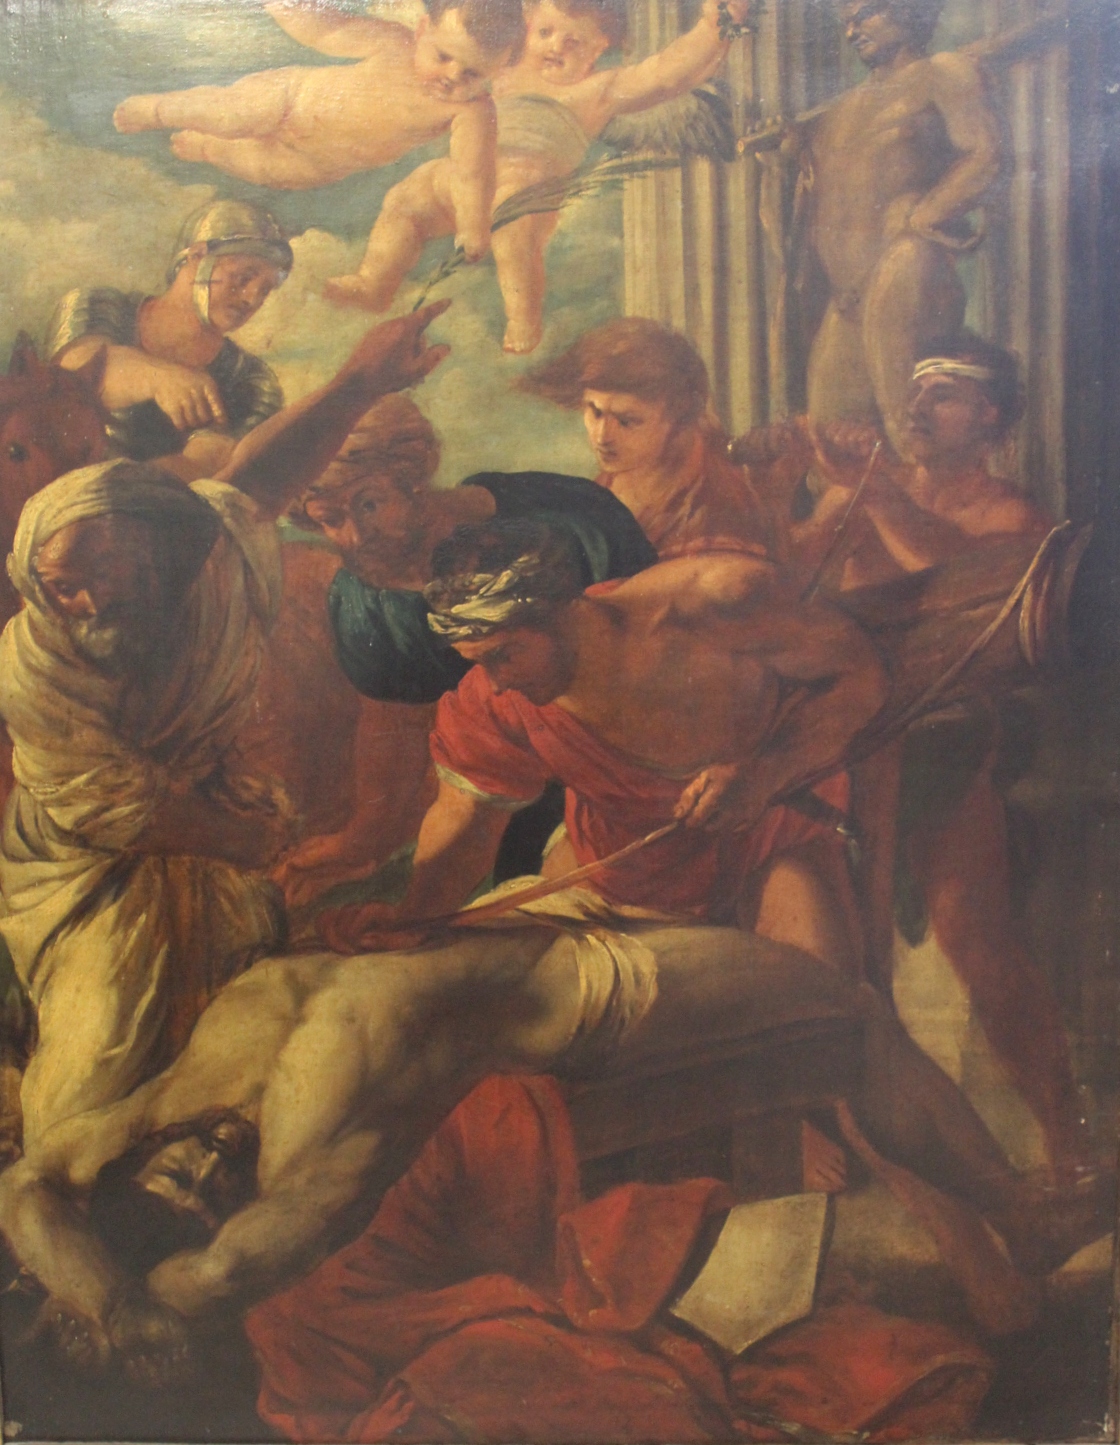 AFTER NICOLAS POUSSIN (1594-1665) THE MARTYRDOM OF ST ERASMUS Oil on canvas 89.5 x 71cm. * An 18th